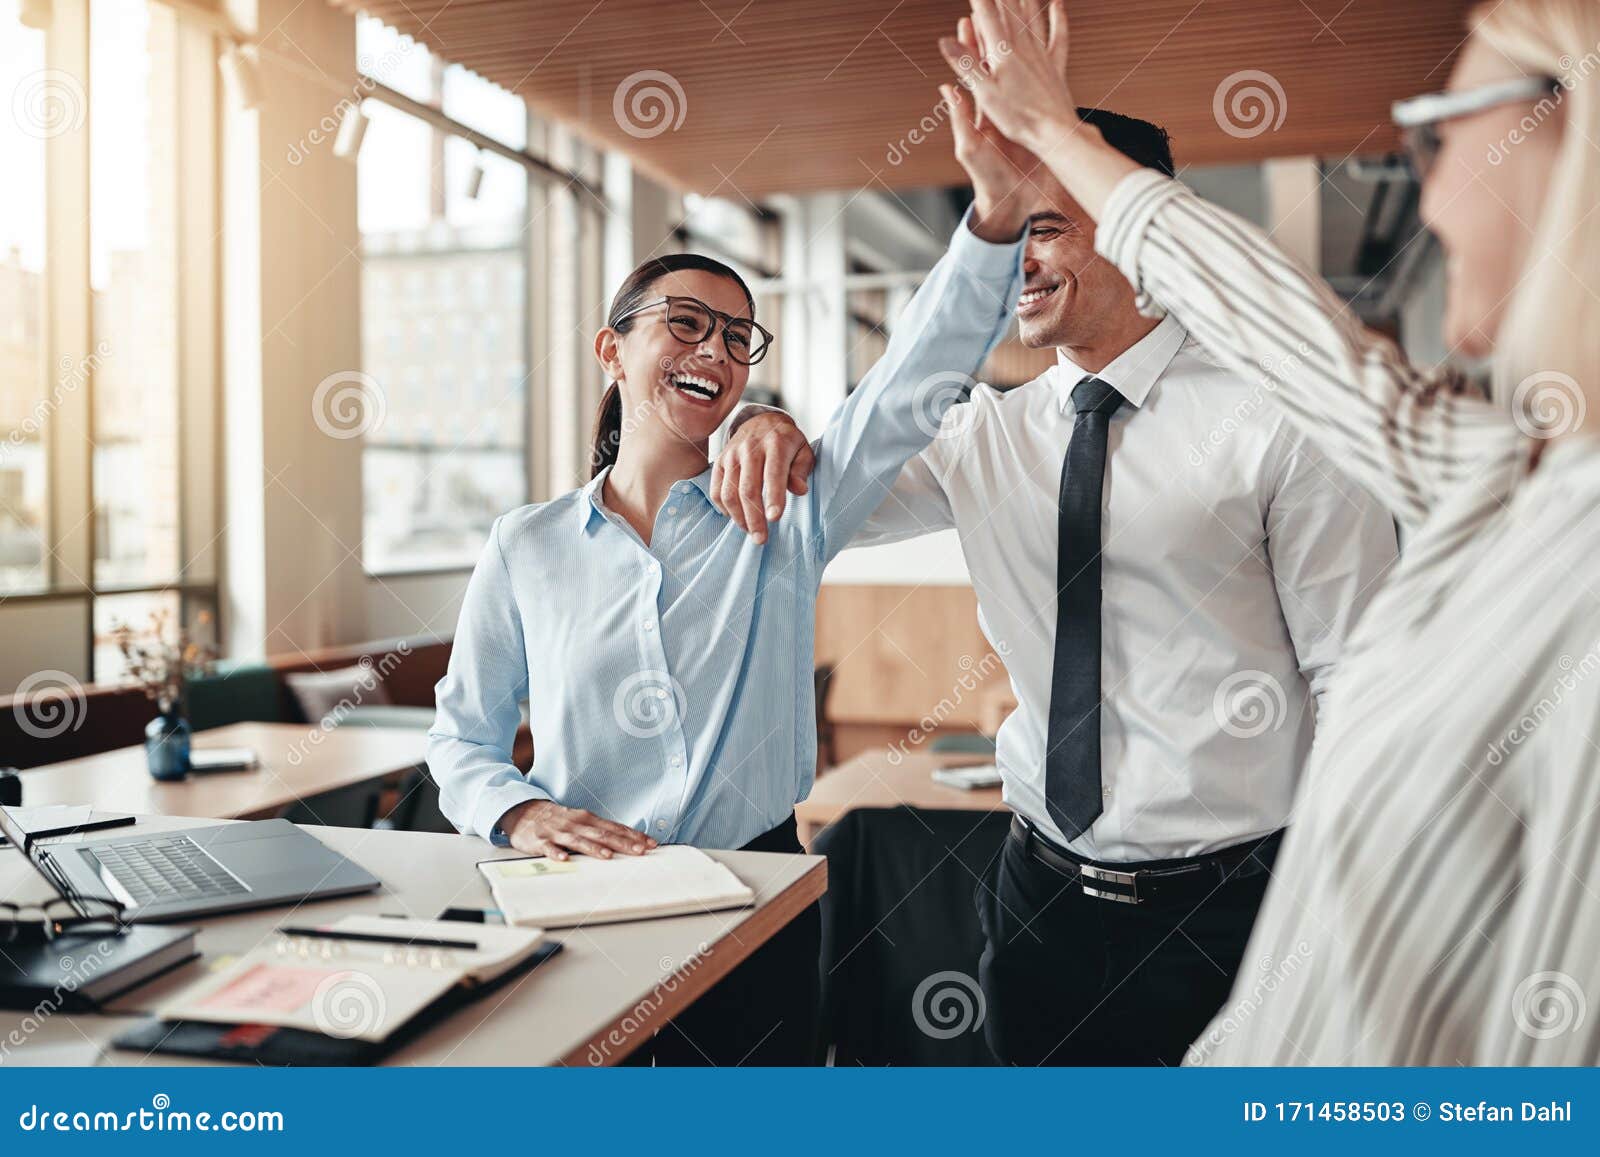 laughing businesspeople high fiving together in an office